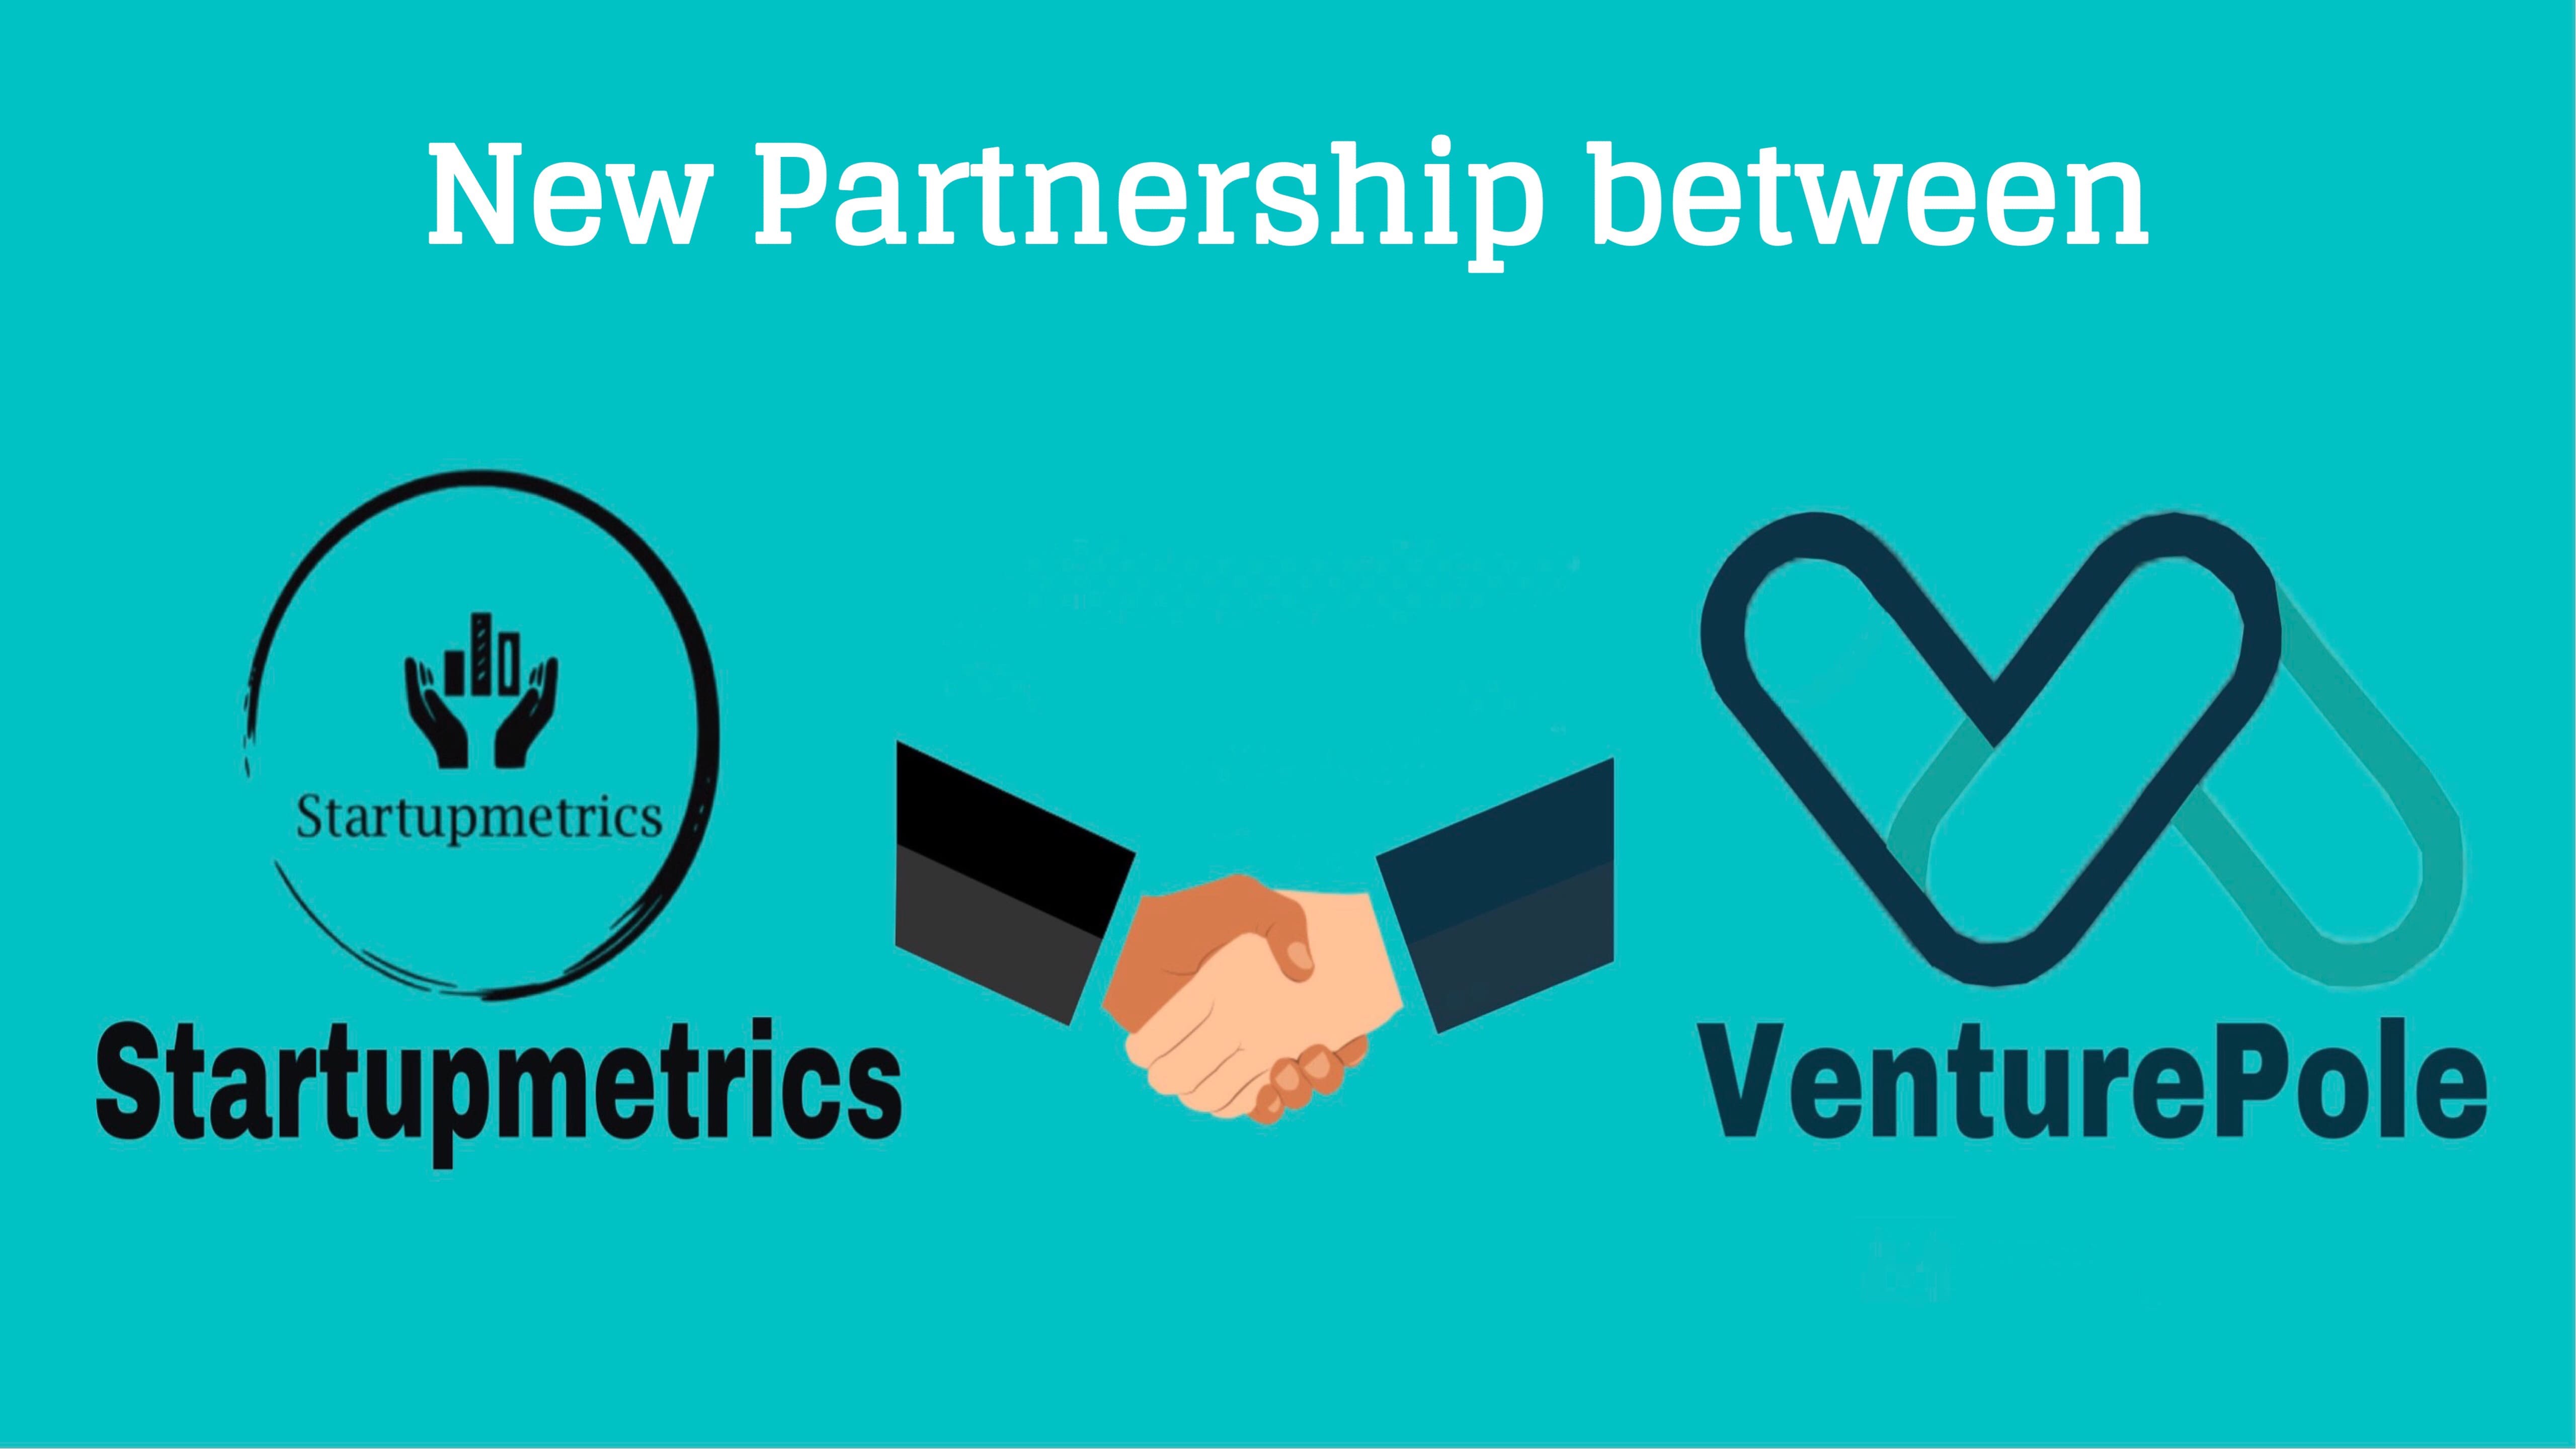 Announcing a new Partnership with Venturepole and introducing new Tools for  Startups to grow more effectively and efficiently